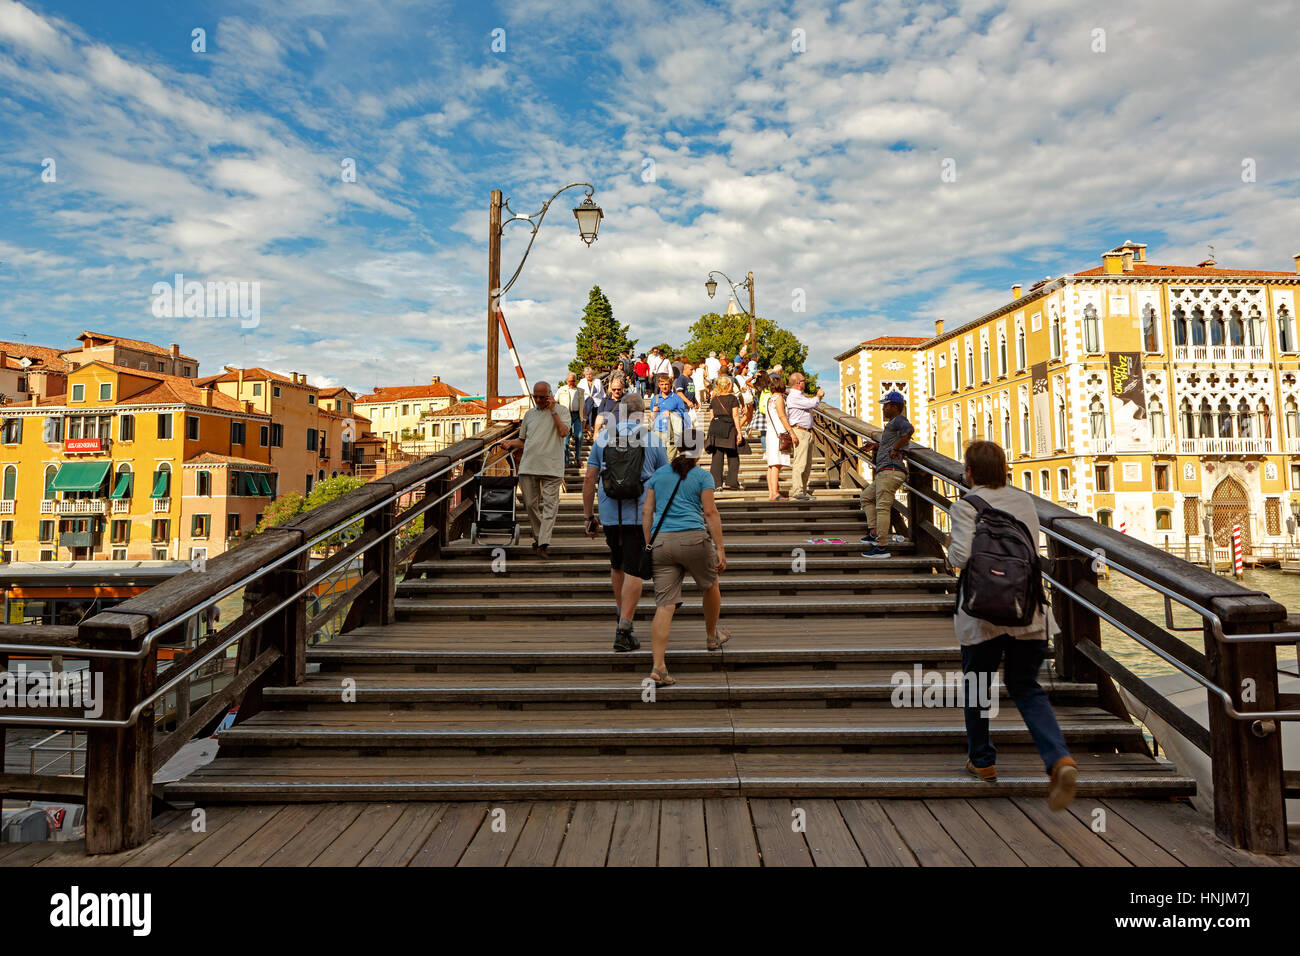 Venice, Italy - September 19, 2016 :People passing the 'Ponte dell'accademia' bridge. It is one of the biggest and  wooden made bridge in the city. Stock Photo